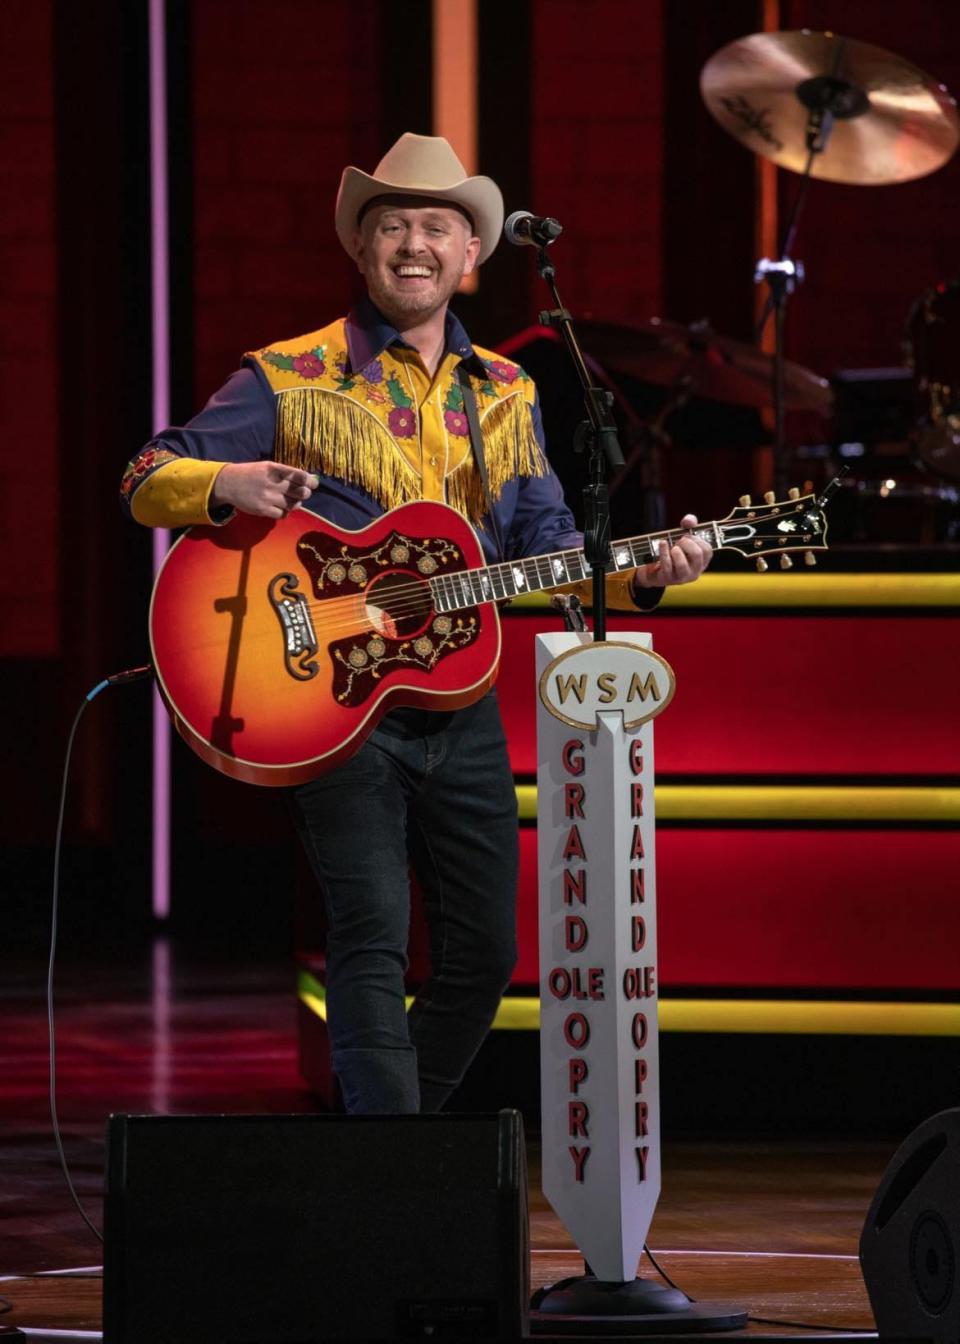 Ryan Humbert of North Canton is shown performing with The Shootouts, a Northeast Ohio-based country music band, at the Grand Ole Opry in Nashville. The band has an Ohio album release show at Lions Lincoln Theatre in Massillon on Saturday.